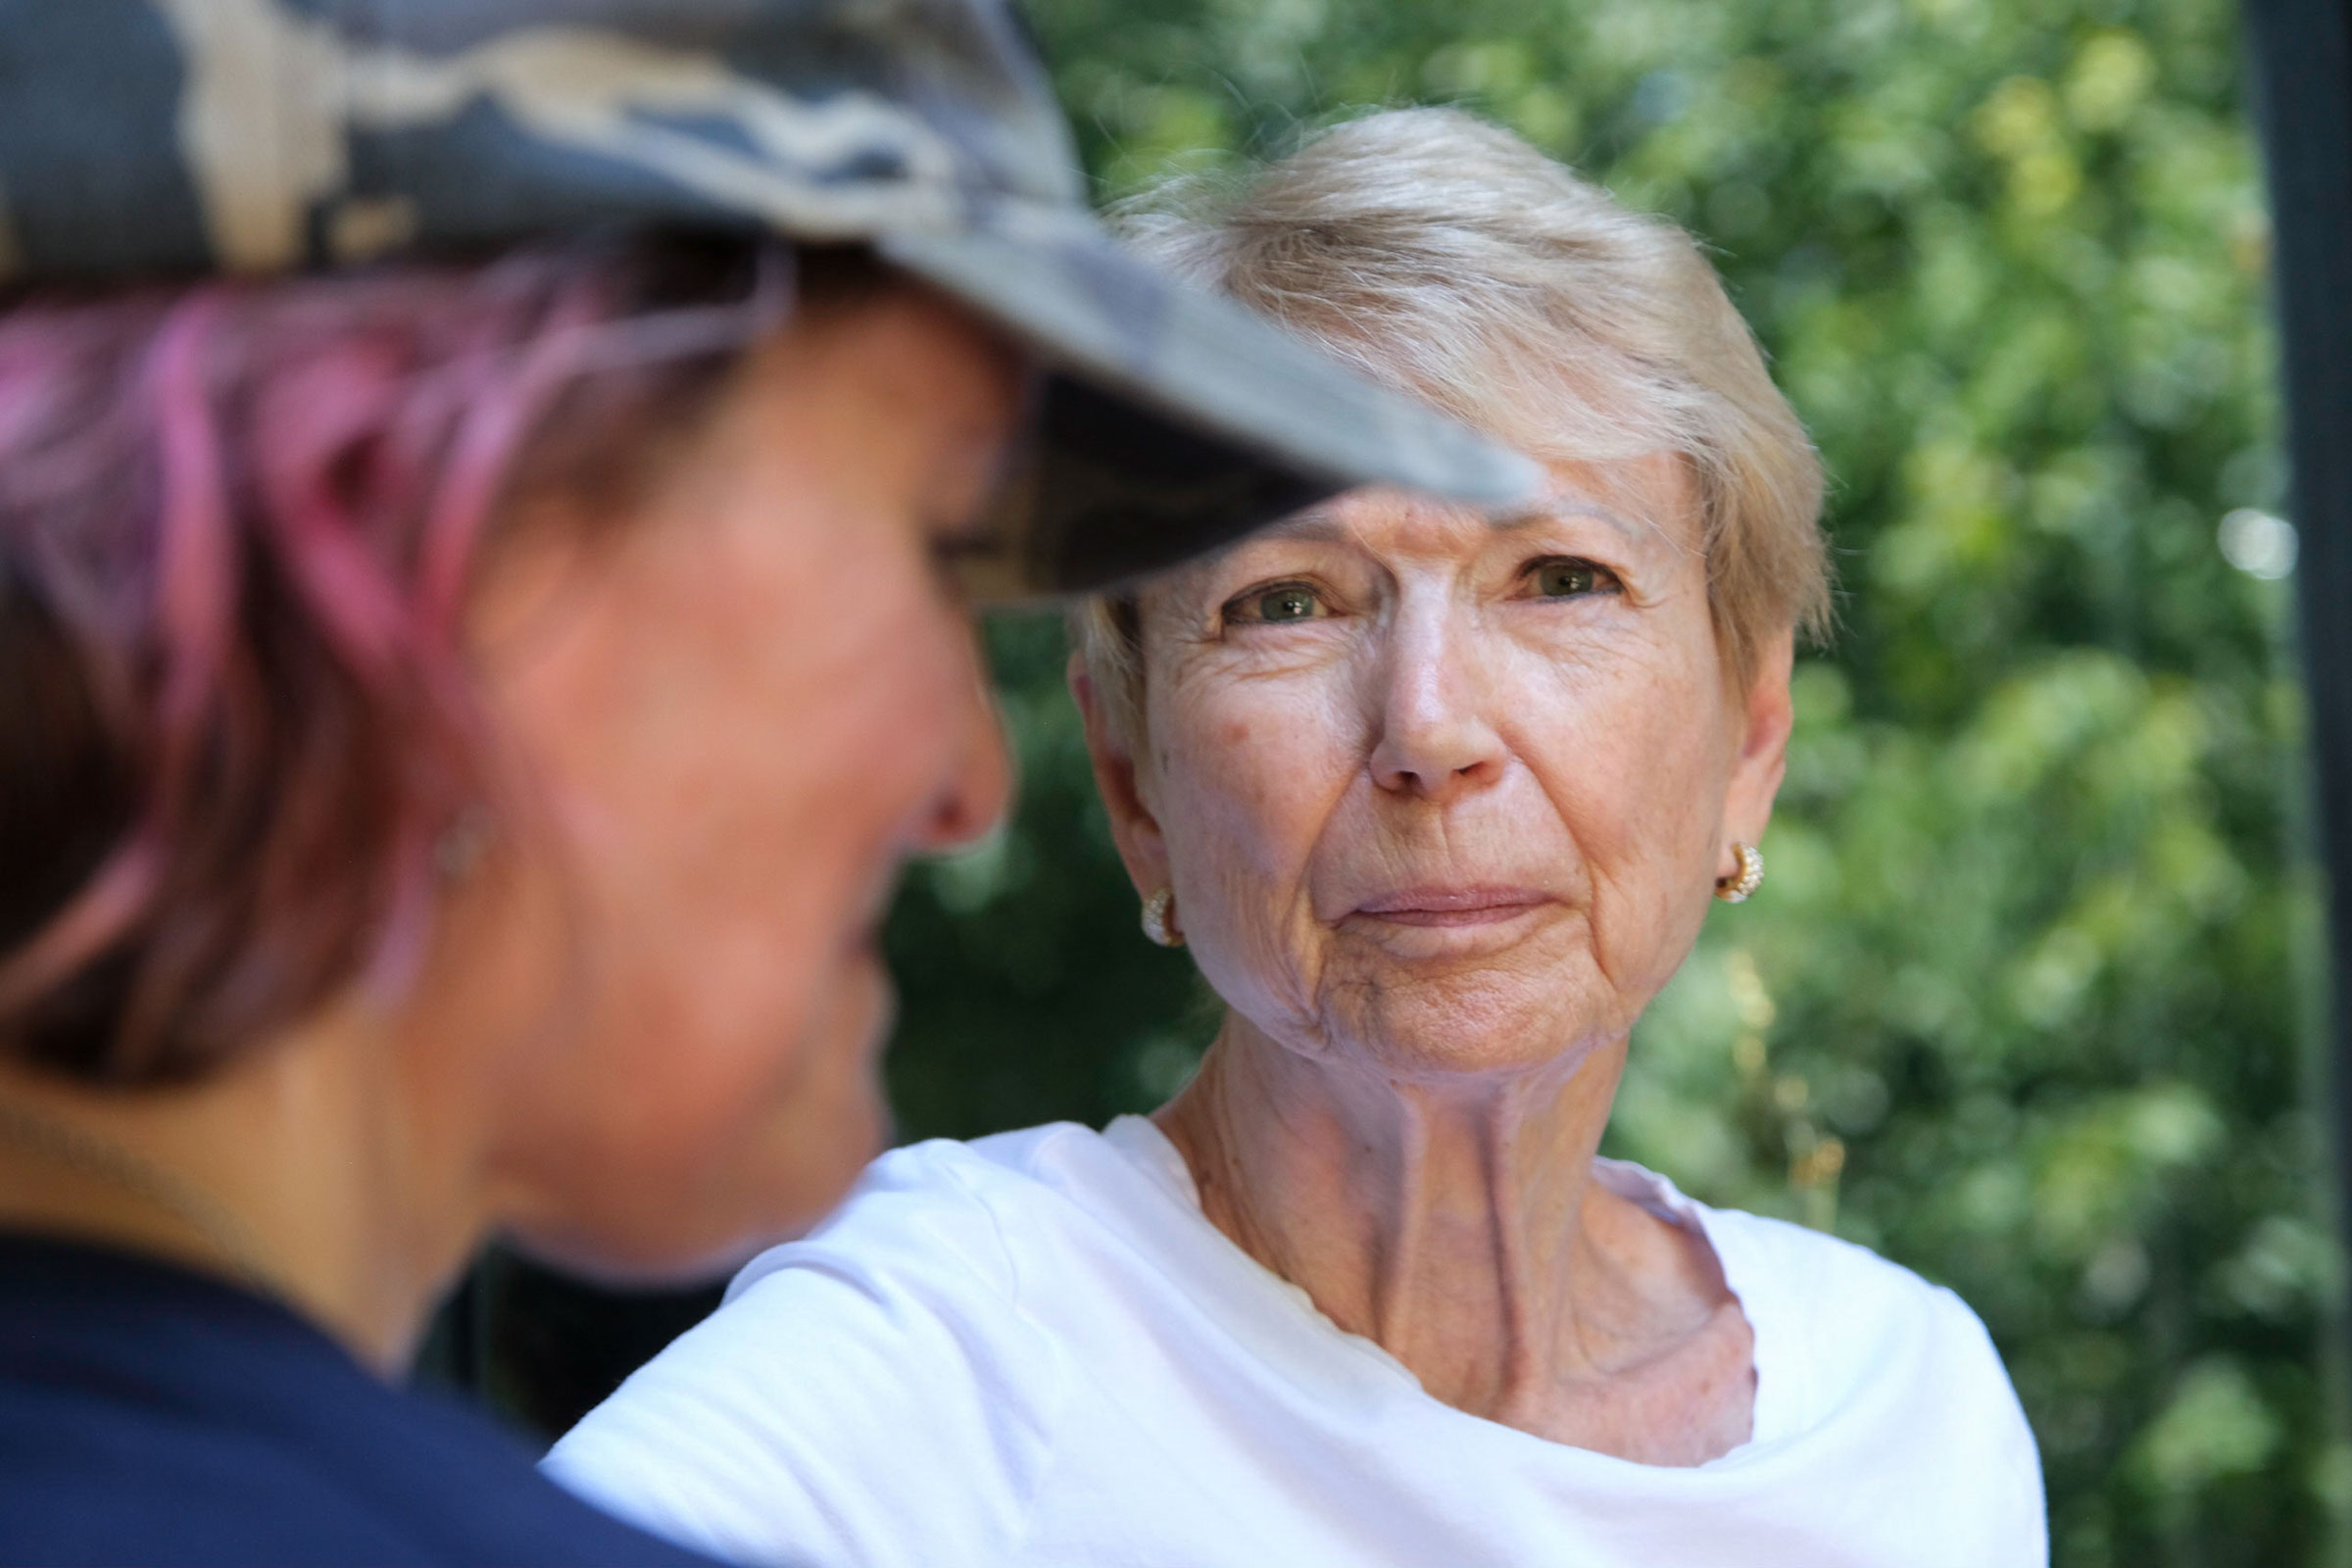 Anne Melia speaks with Dottie Jensen, 87, while canvassing for Kansans for Constitutional Freedom in Leawood, Kansas on July 23, 2022. Jensen said she plans to vote "no." Arin Yoon for TIME.